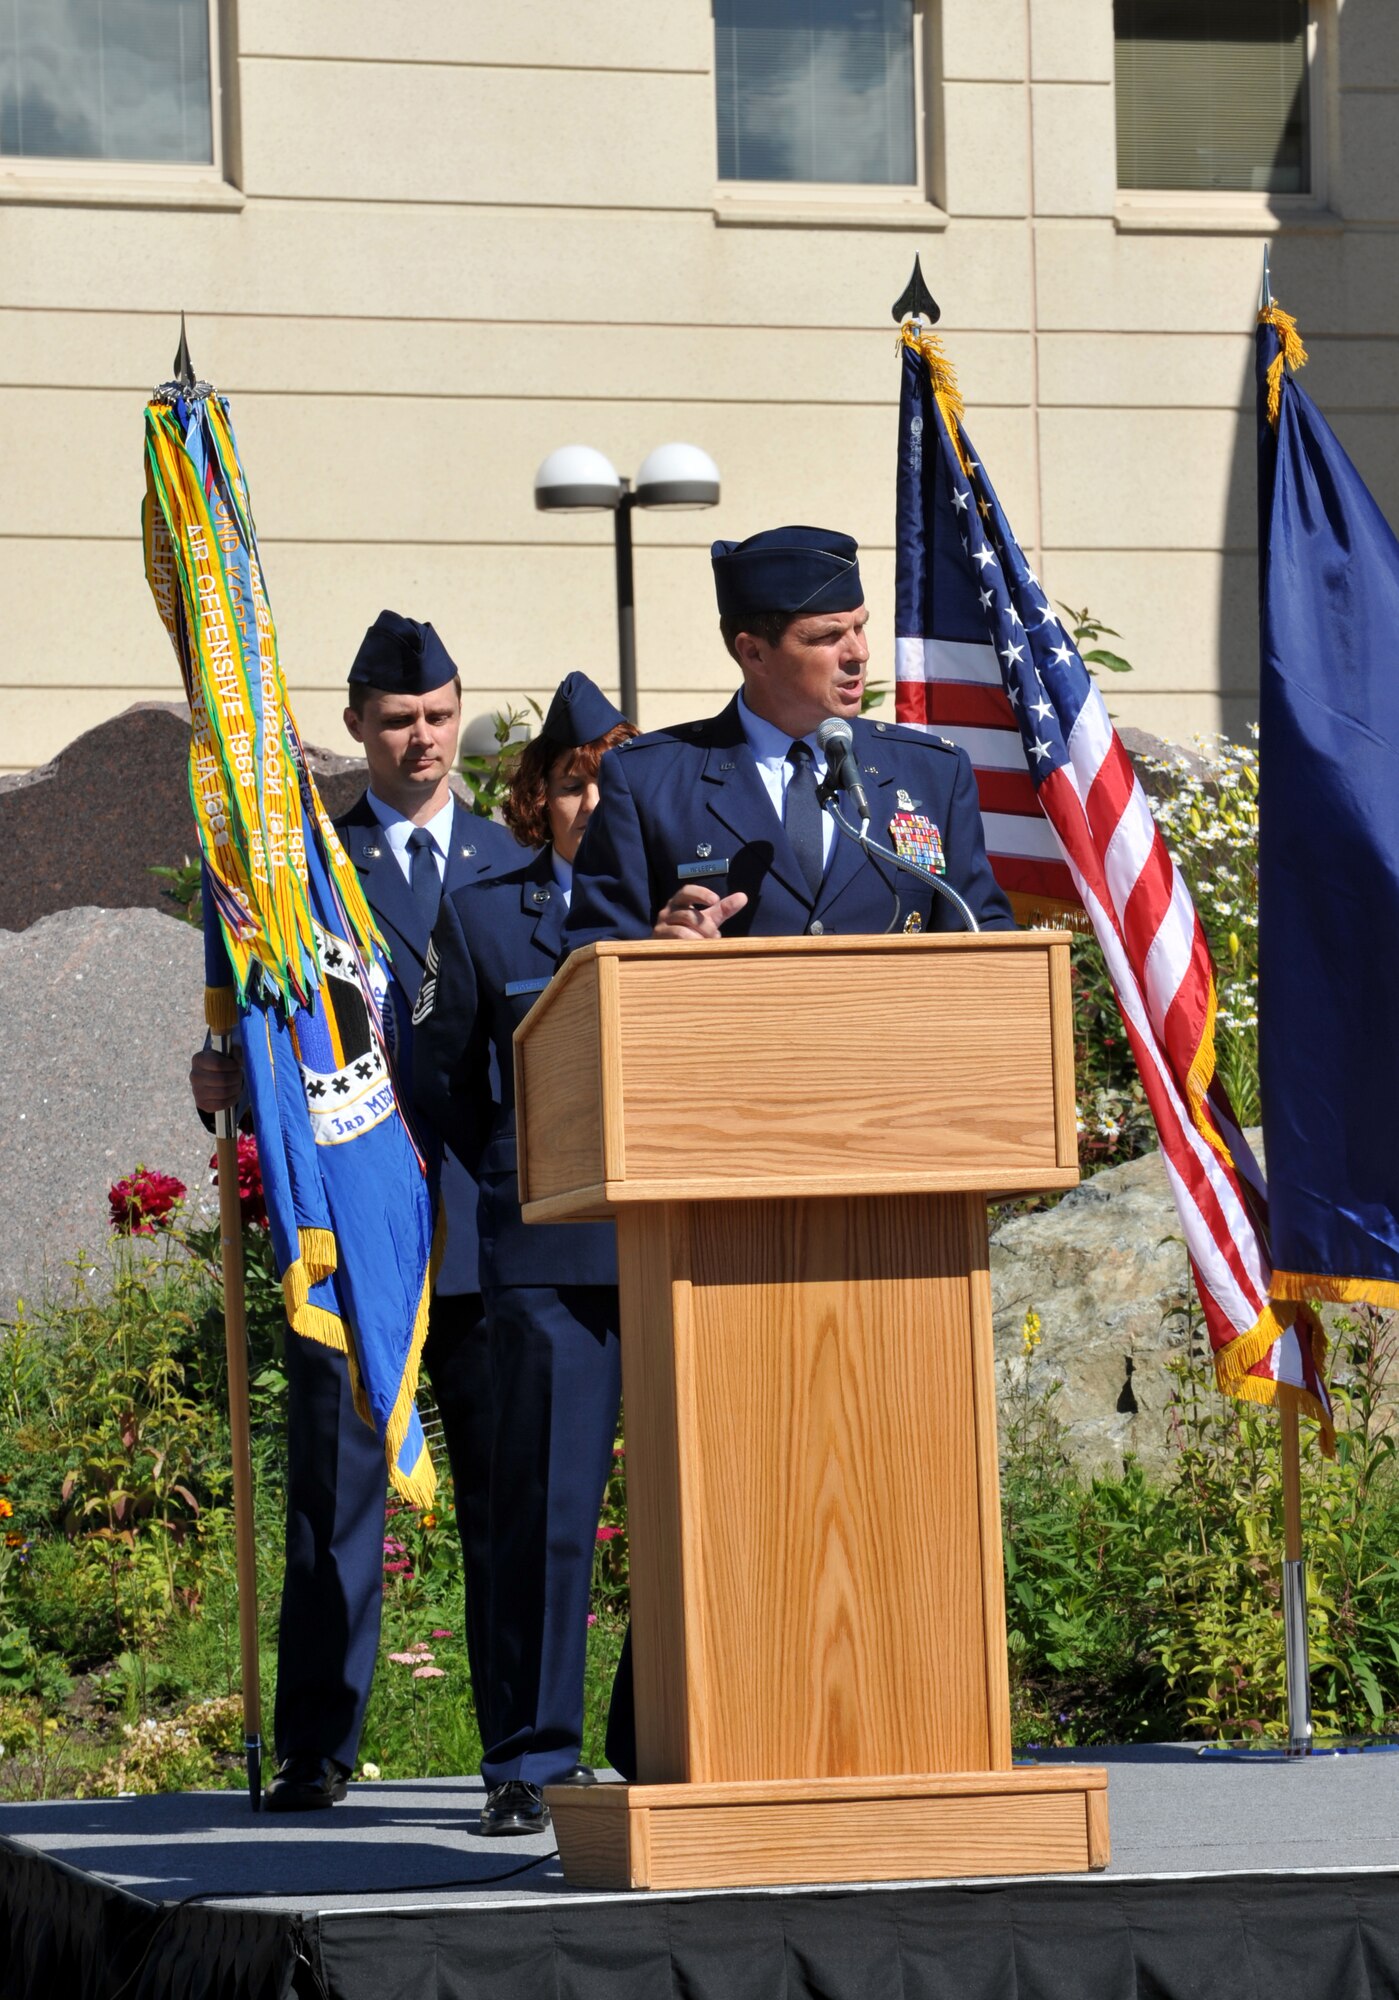 ELMENDORF AIR FORCE BASE, Alaska -- Col. Richard Walberg, 3rd Wing commander, speaks to the attendants of the 3rd Medical Group change of command ceremony Aug. 8. The 3rd MDG serves the dynamically changing health needs of 81,000 Alaskan Department of Defense and VA beneficiaries through TRICARE, DOD/VA Joint Venture, and the Alaska Federal Health Care Partnership. (U.S. Air Force photo/Airman 1st Class Tinese Treadwell)